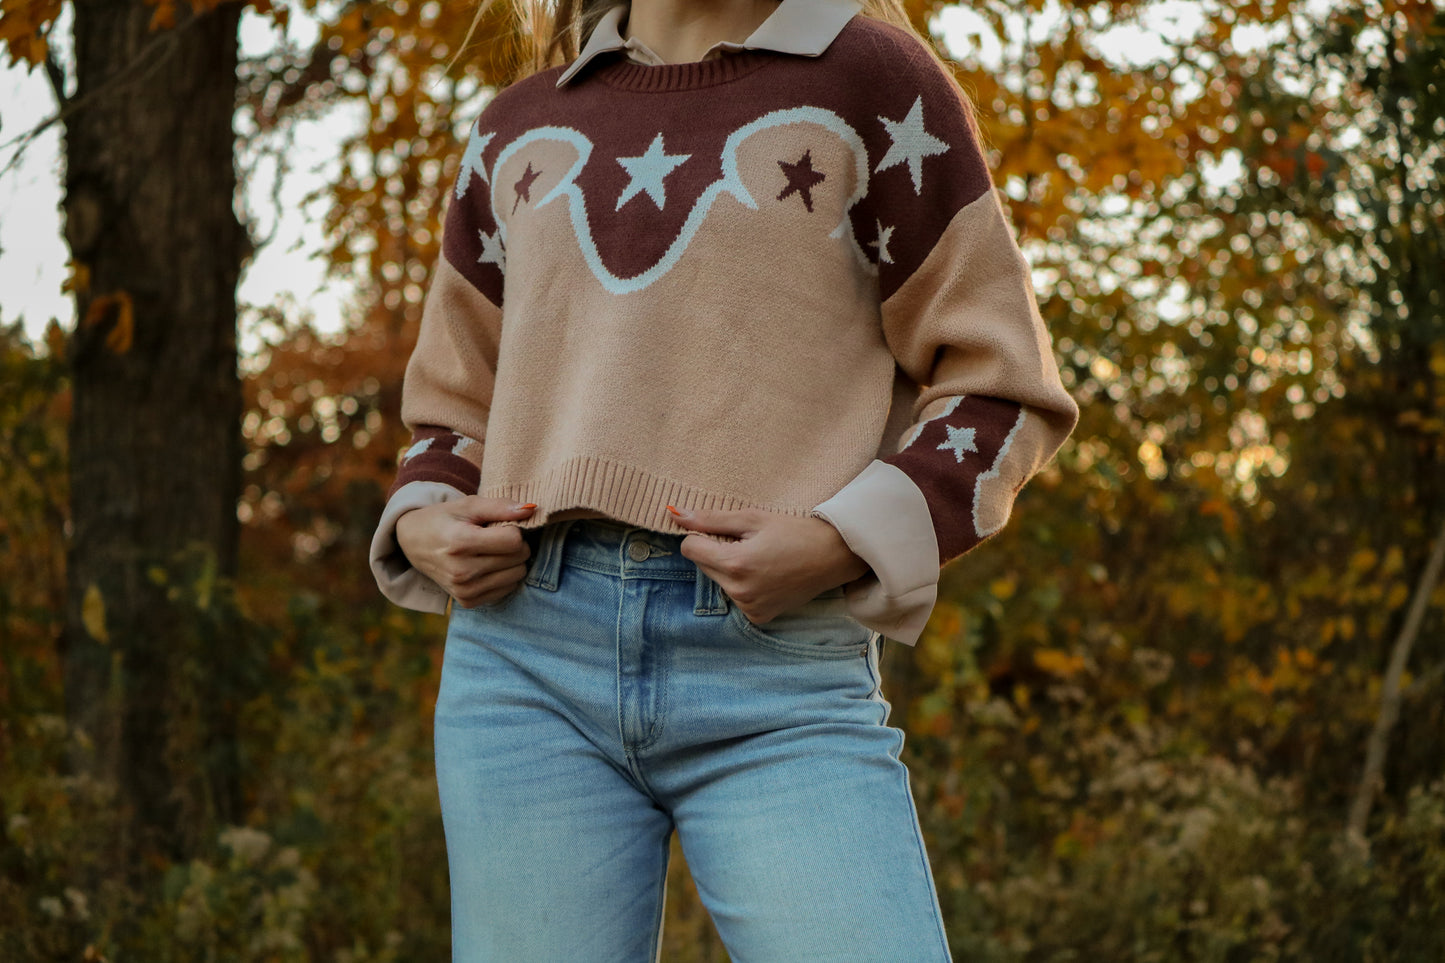 Western Star Cropped Sweater